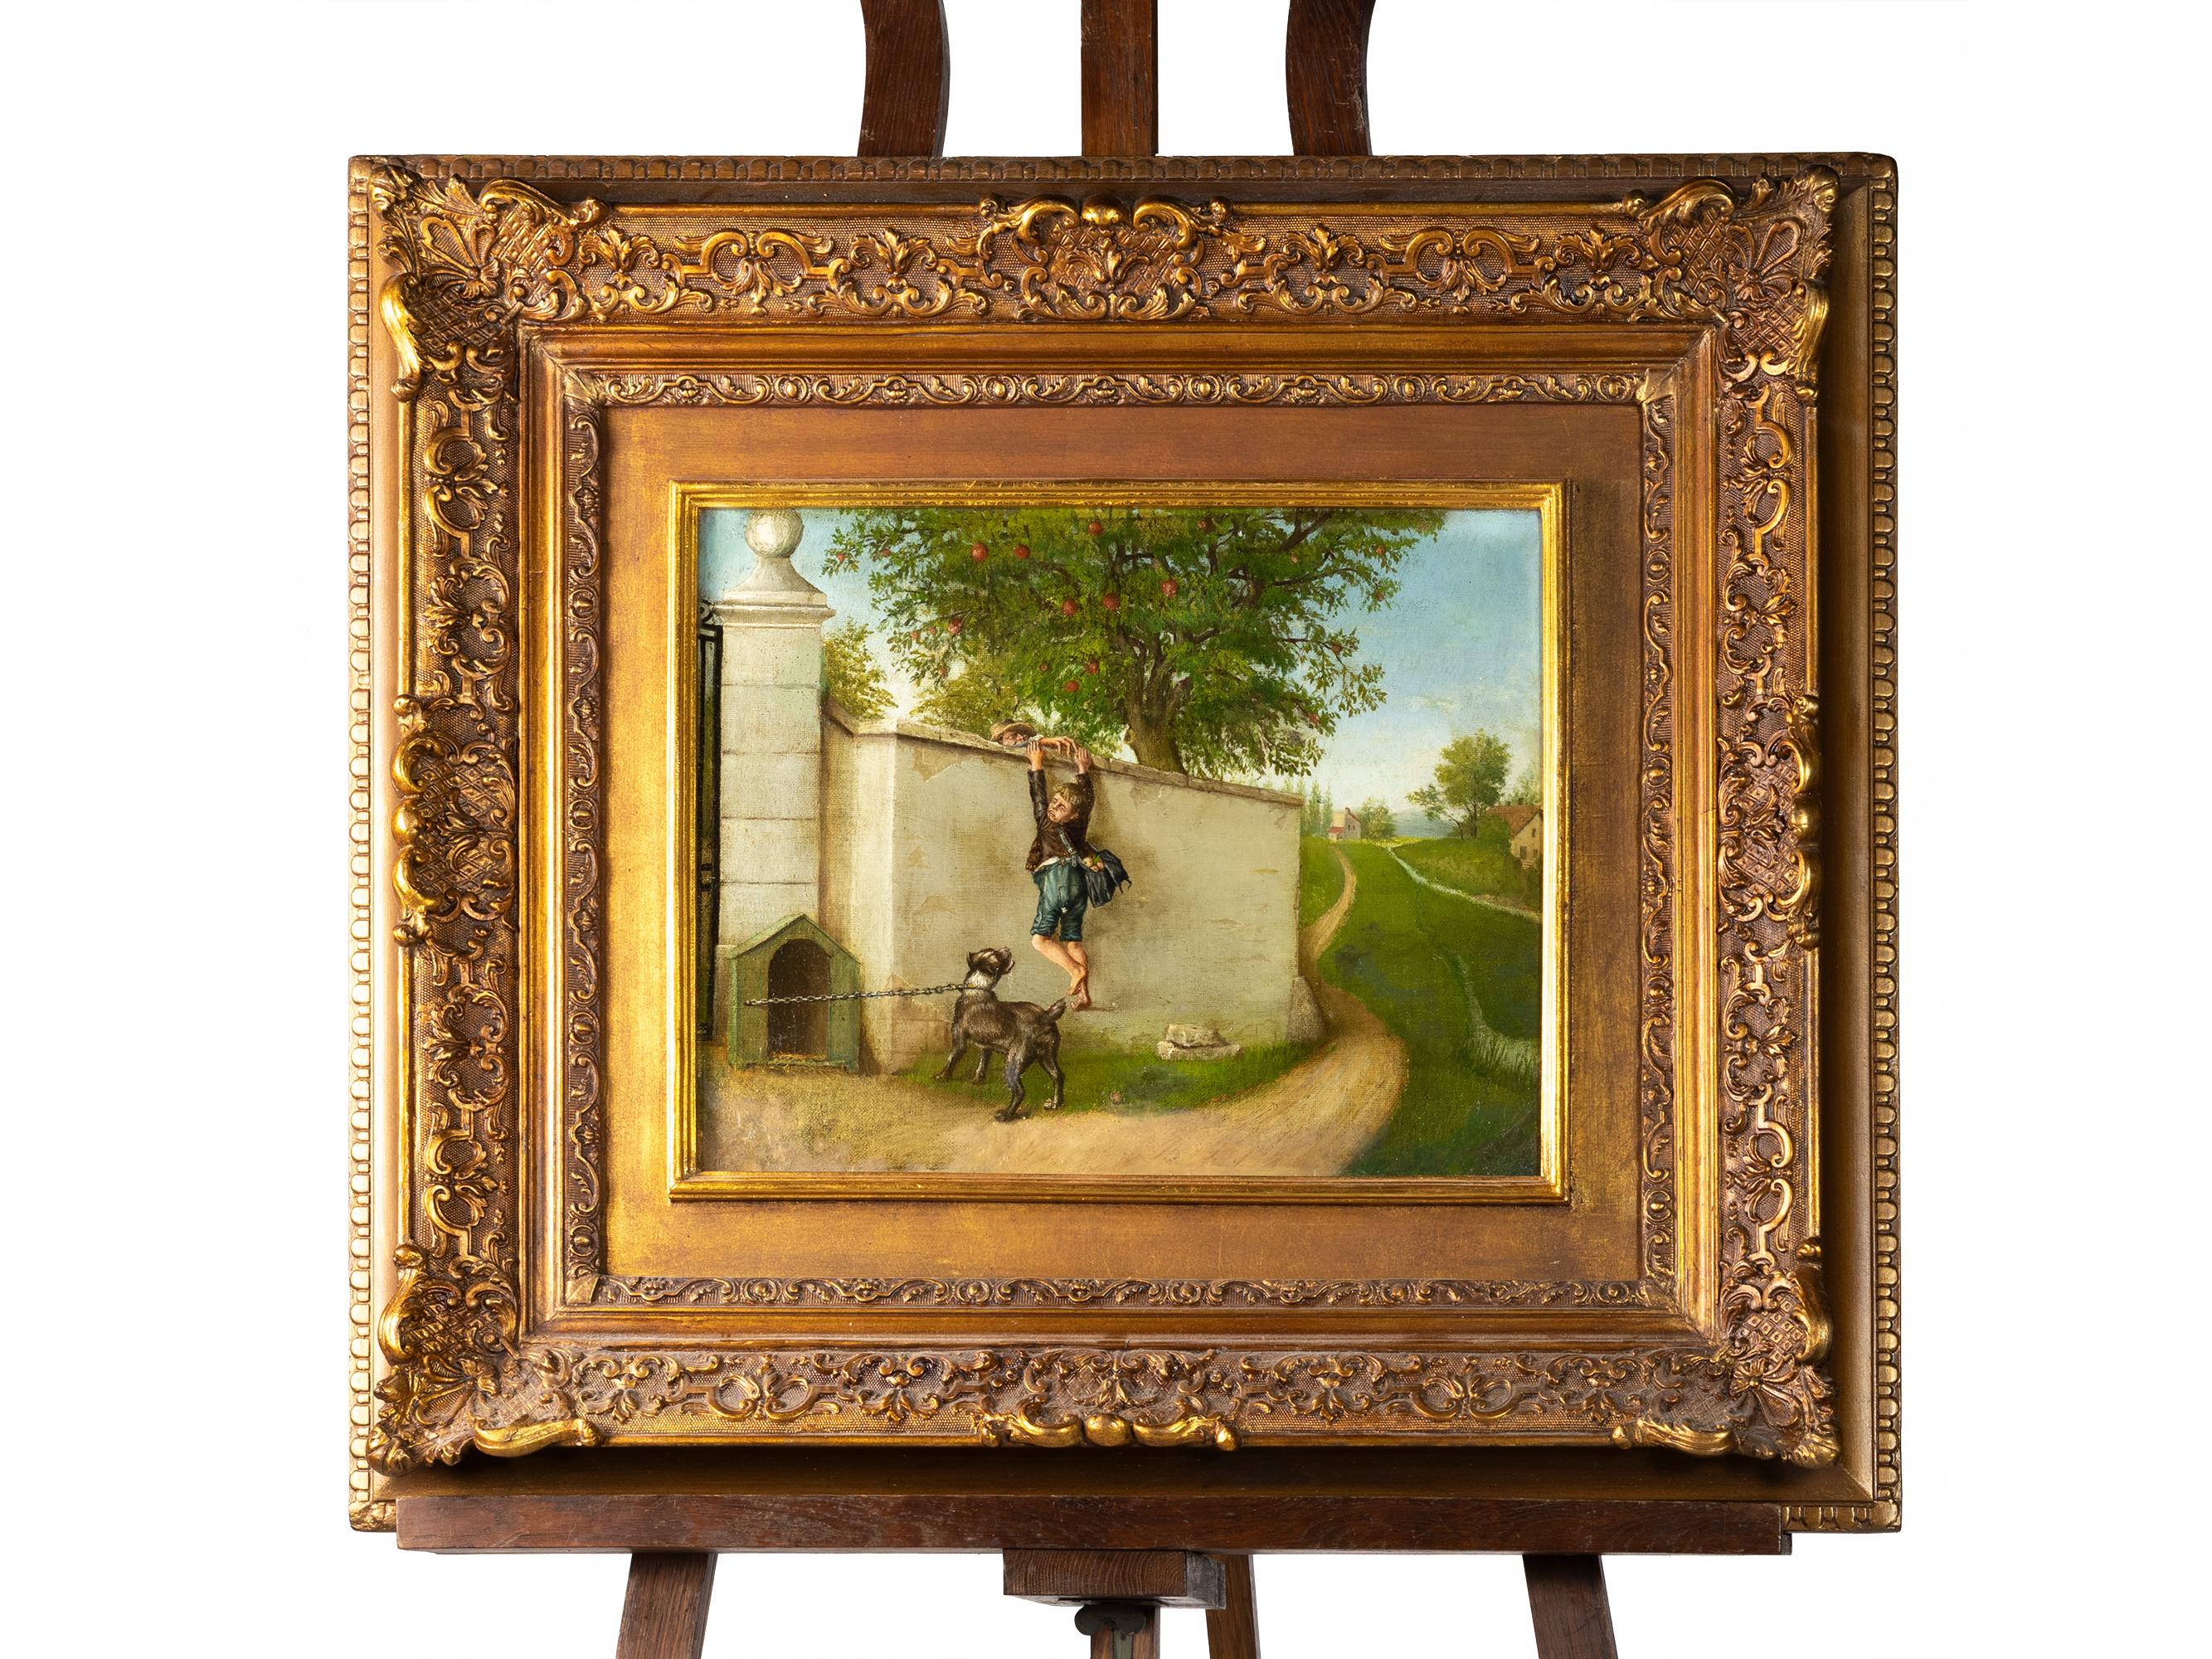 A charming Romanticism Period oil on wood painting of a young boy climbing a property wall, evading the watchful eye of a farmer and his loyal guard dog. 

The scene is reminiscent of a child's innocent mischief, capturing the carefree spirit of